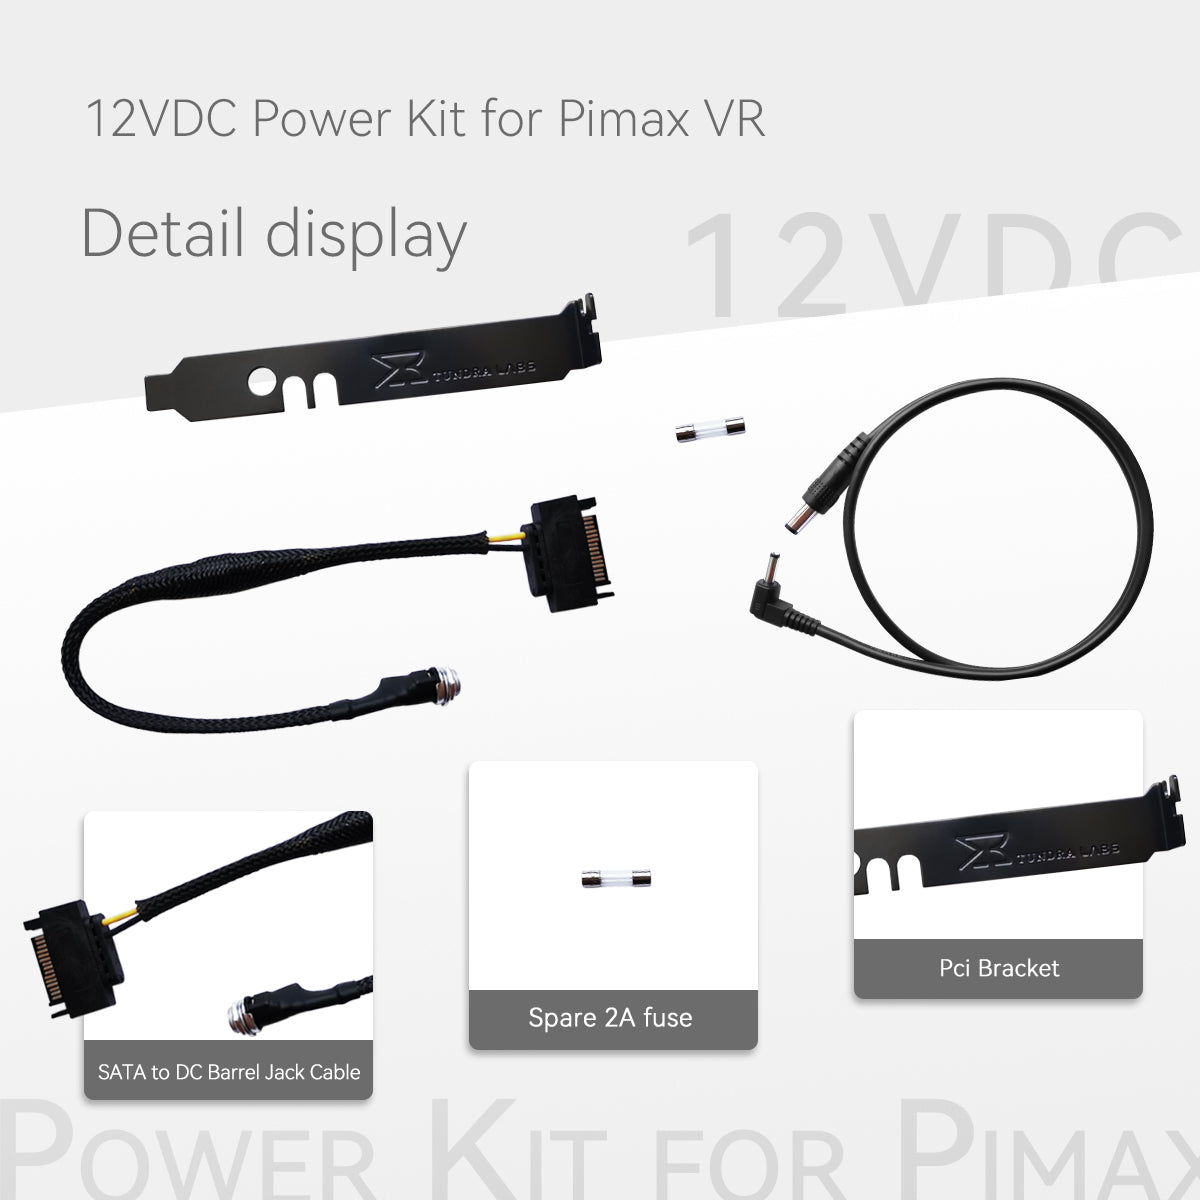 8. 12VDC Power Kit for Head  Mounted Displays